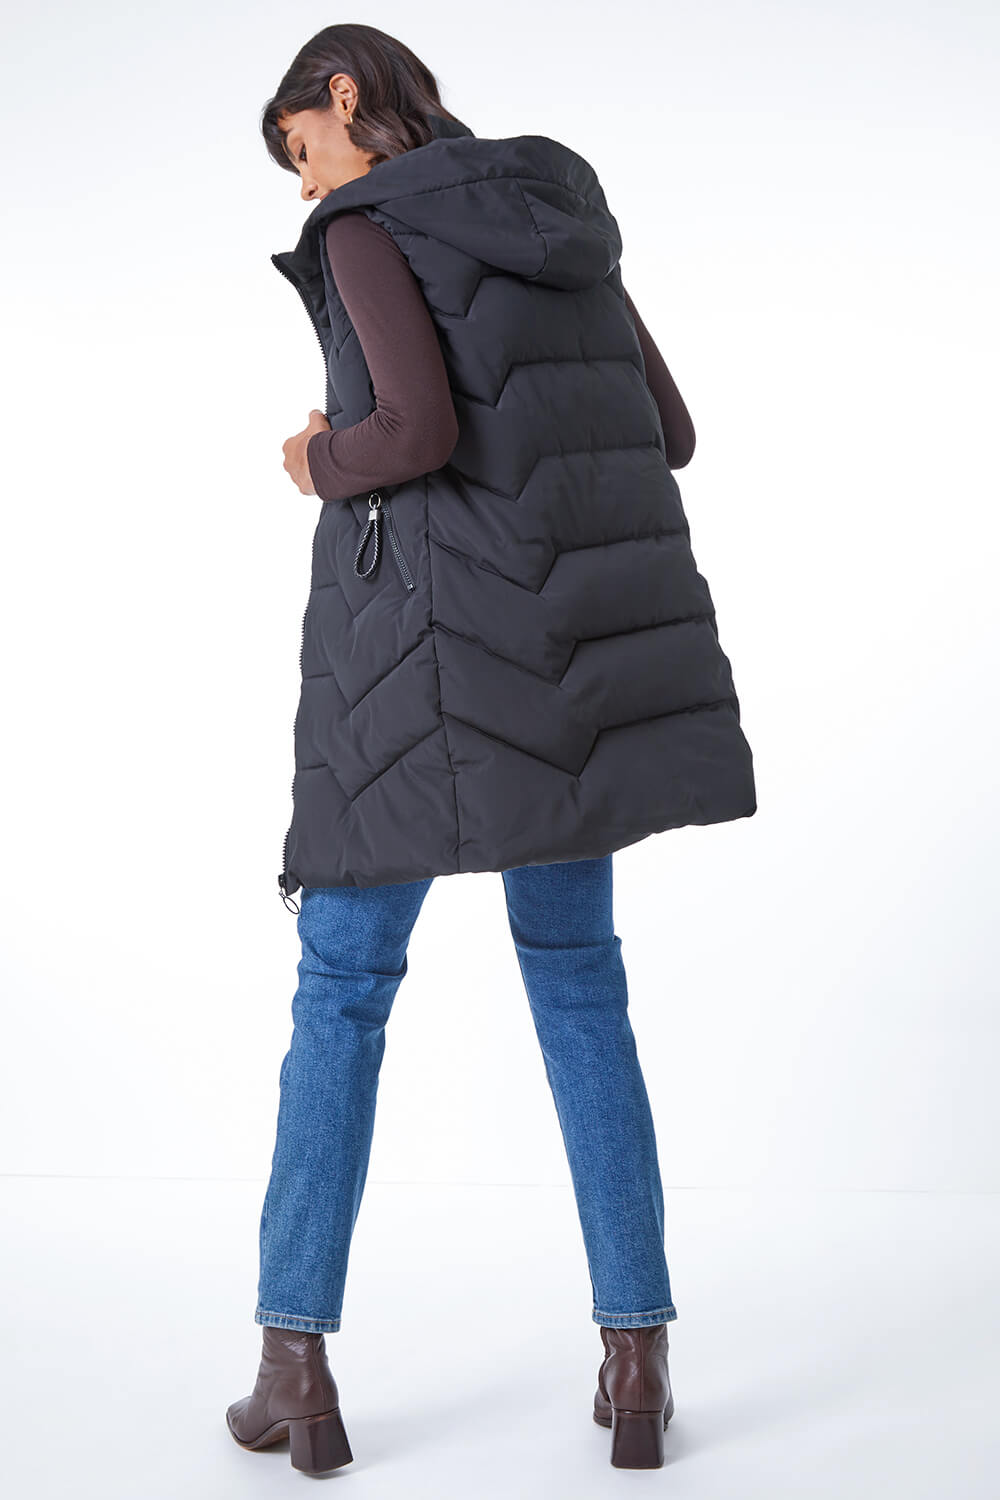 Black Geometric Quilted Hooded Gilet, Image 3 of 5